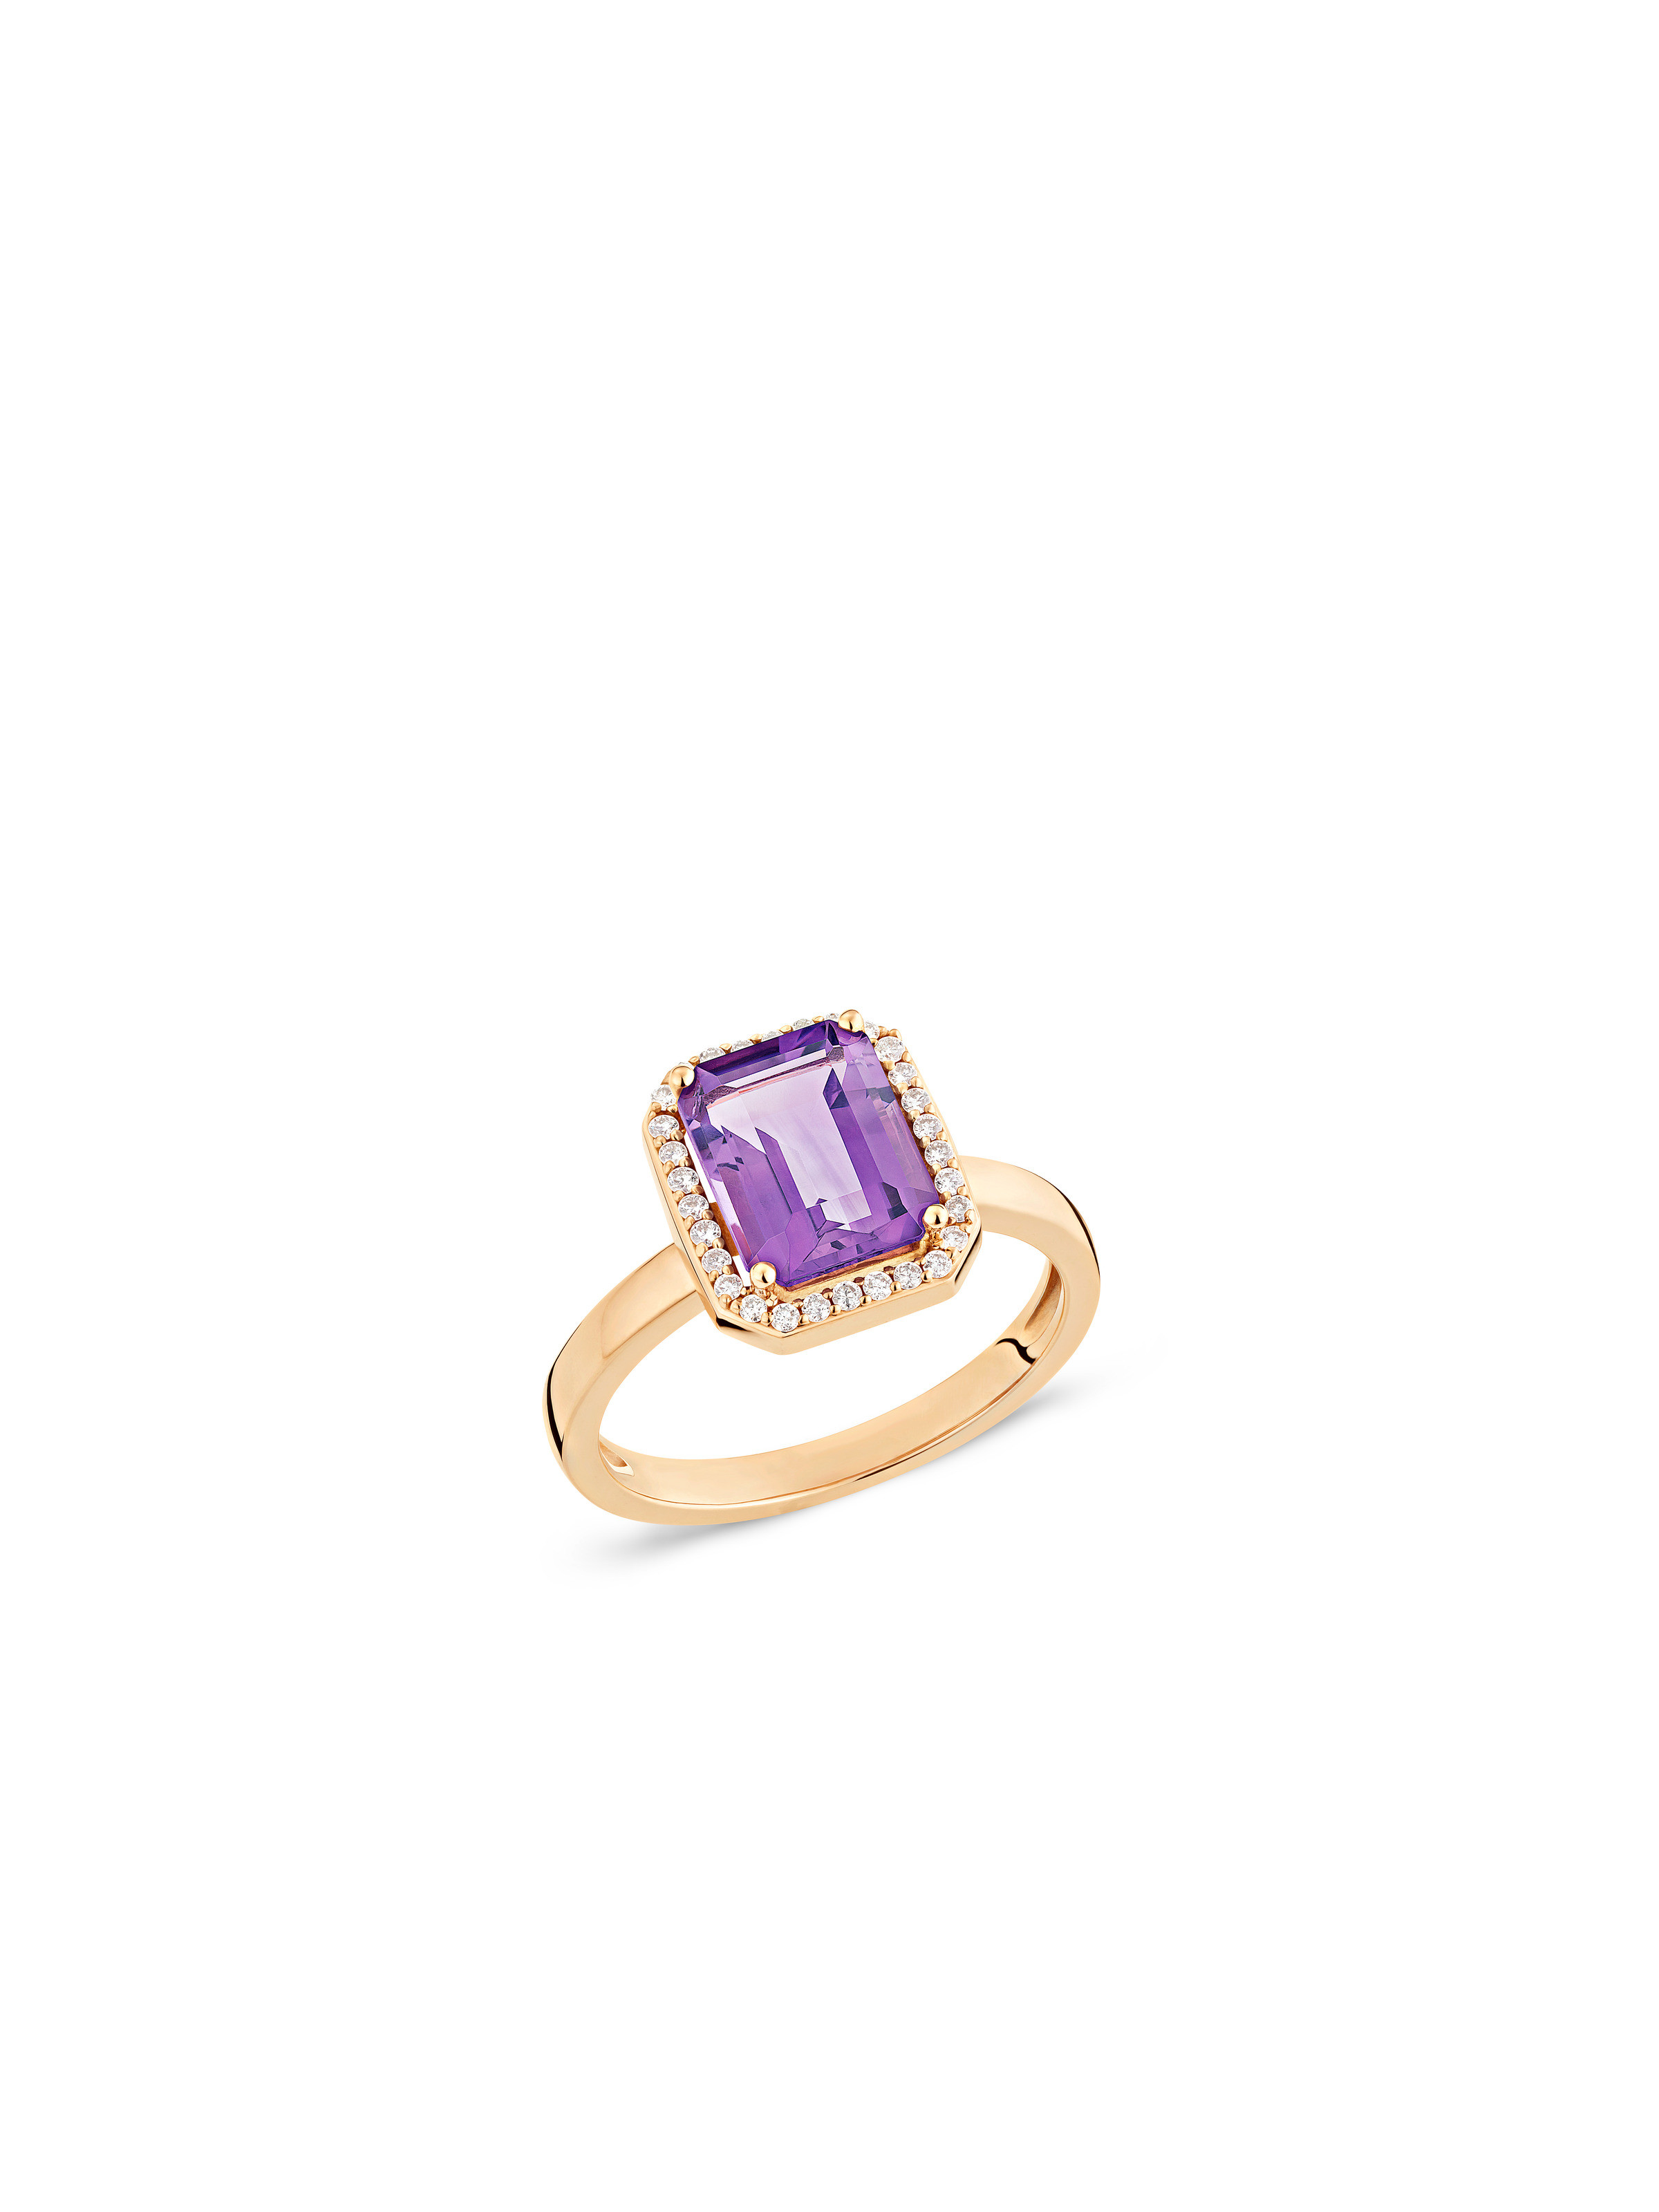 Electrify ring | By Wempe Casuals | Wempe Jewelers